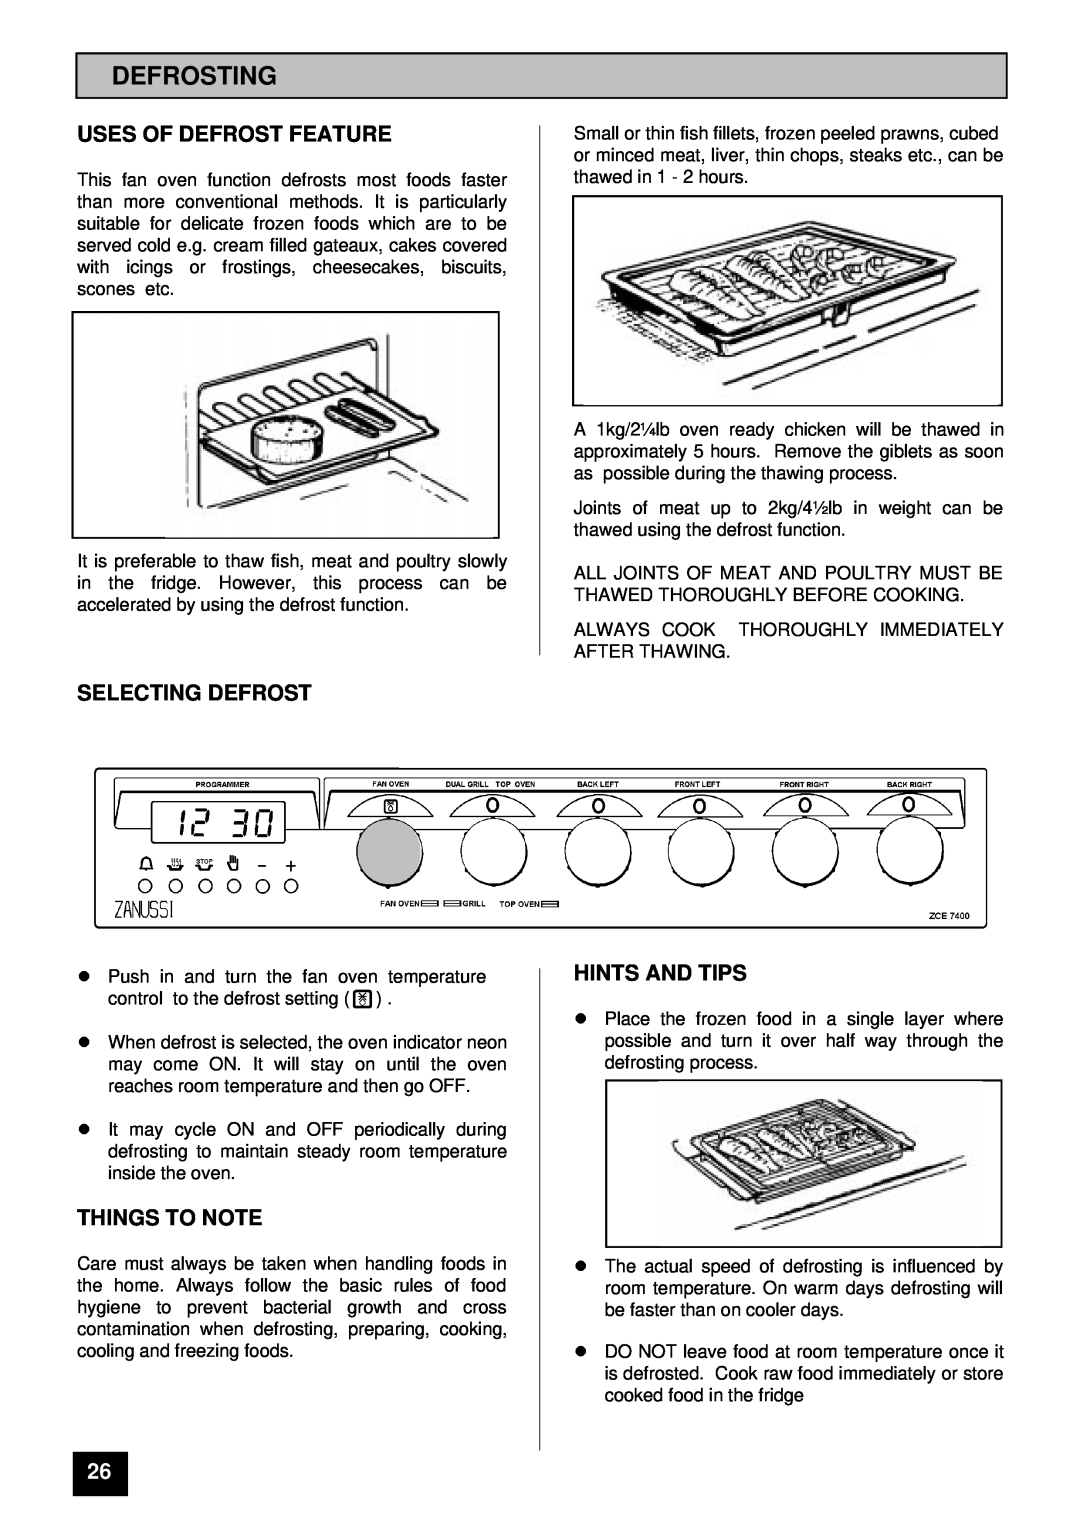 Zanussi ZCE 7400 manual Defrosting, Uses Of Defrost Feature, Selecting Defrost, Things To Note, lHINTS AND TIPS 